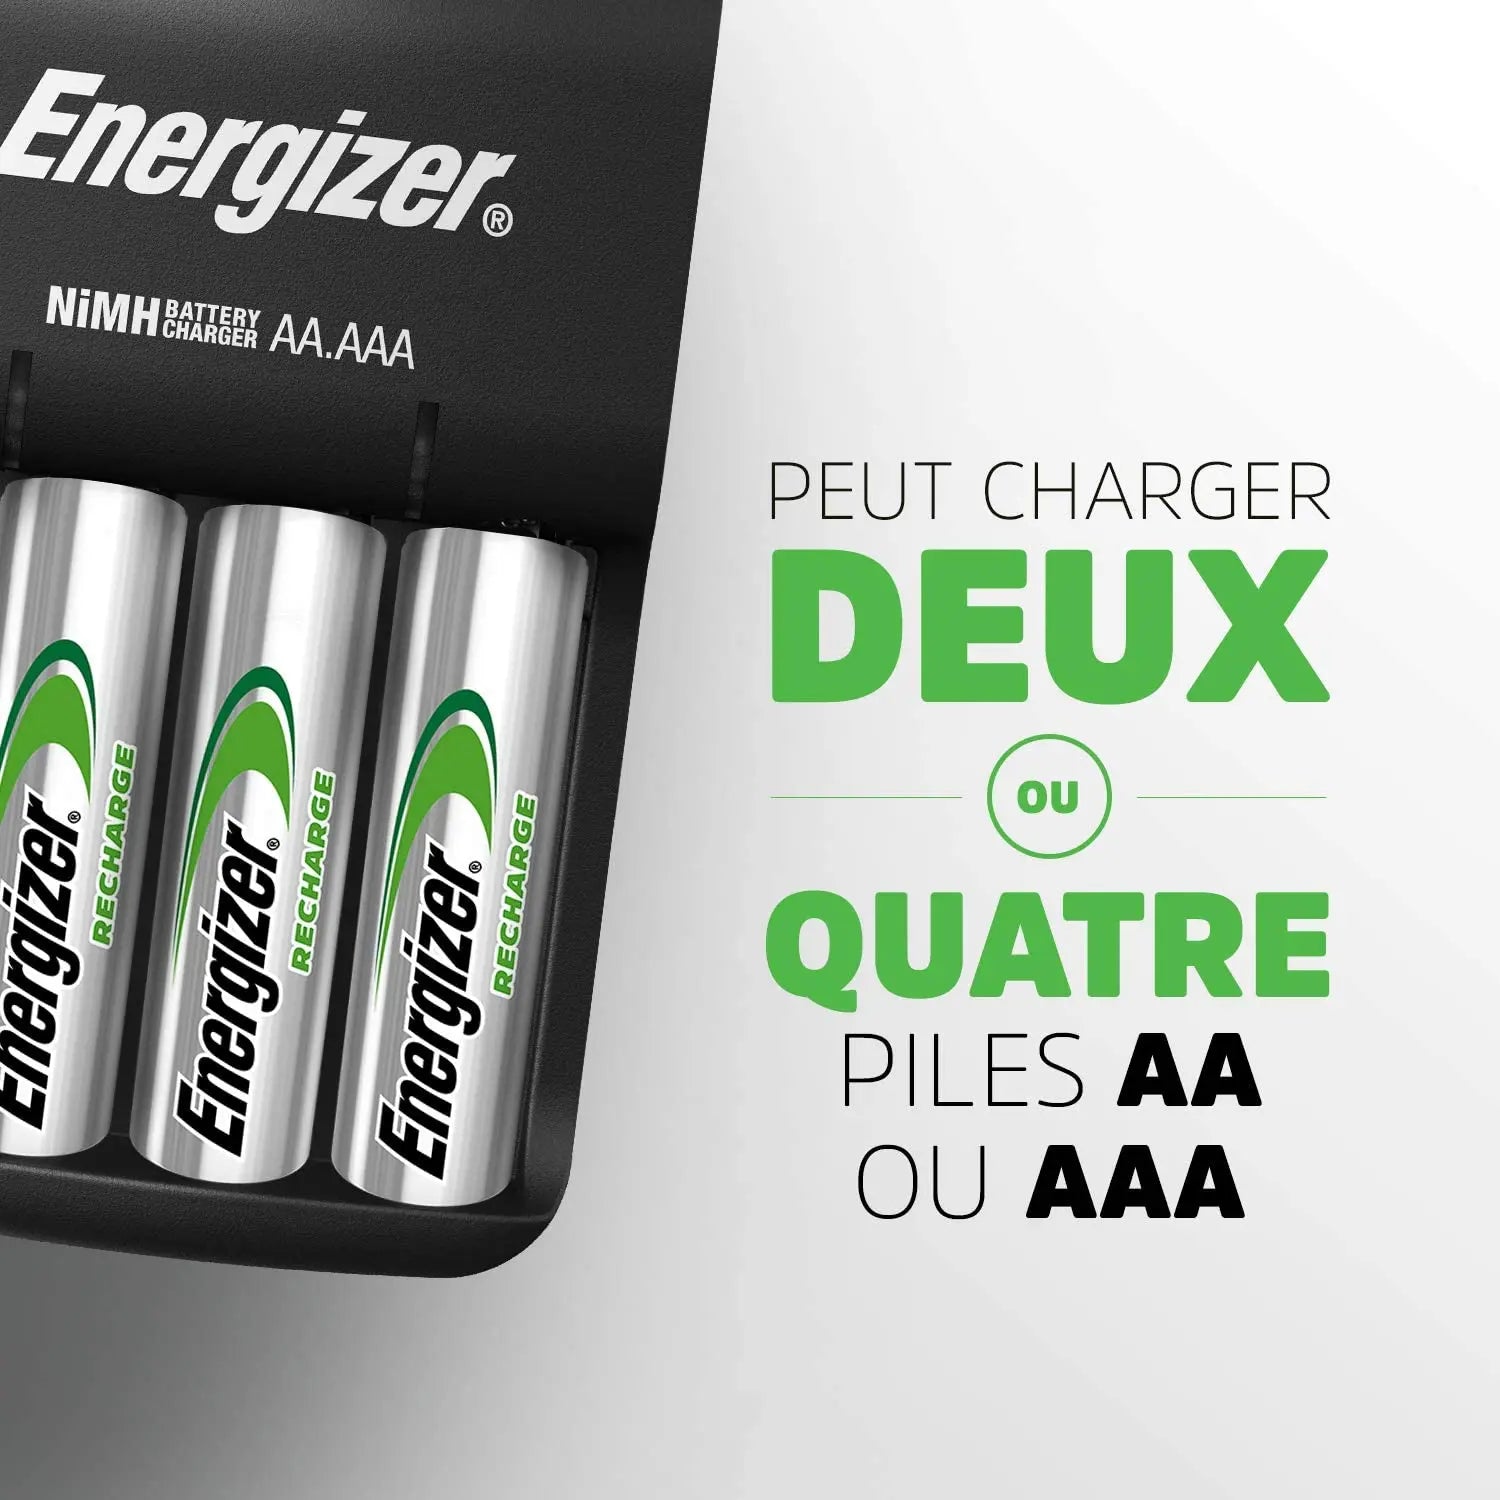 Chargeur Piles Rechargeables AA et AAA - 4 Piles AA Minh